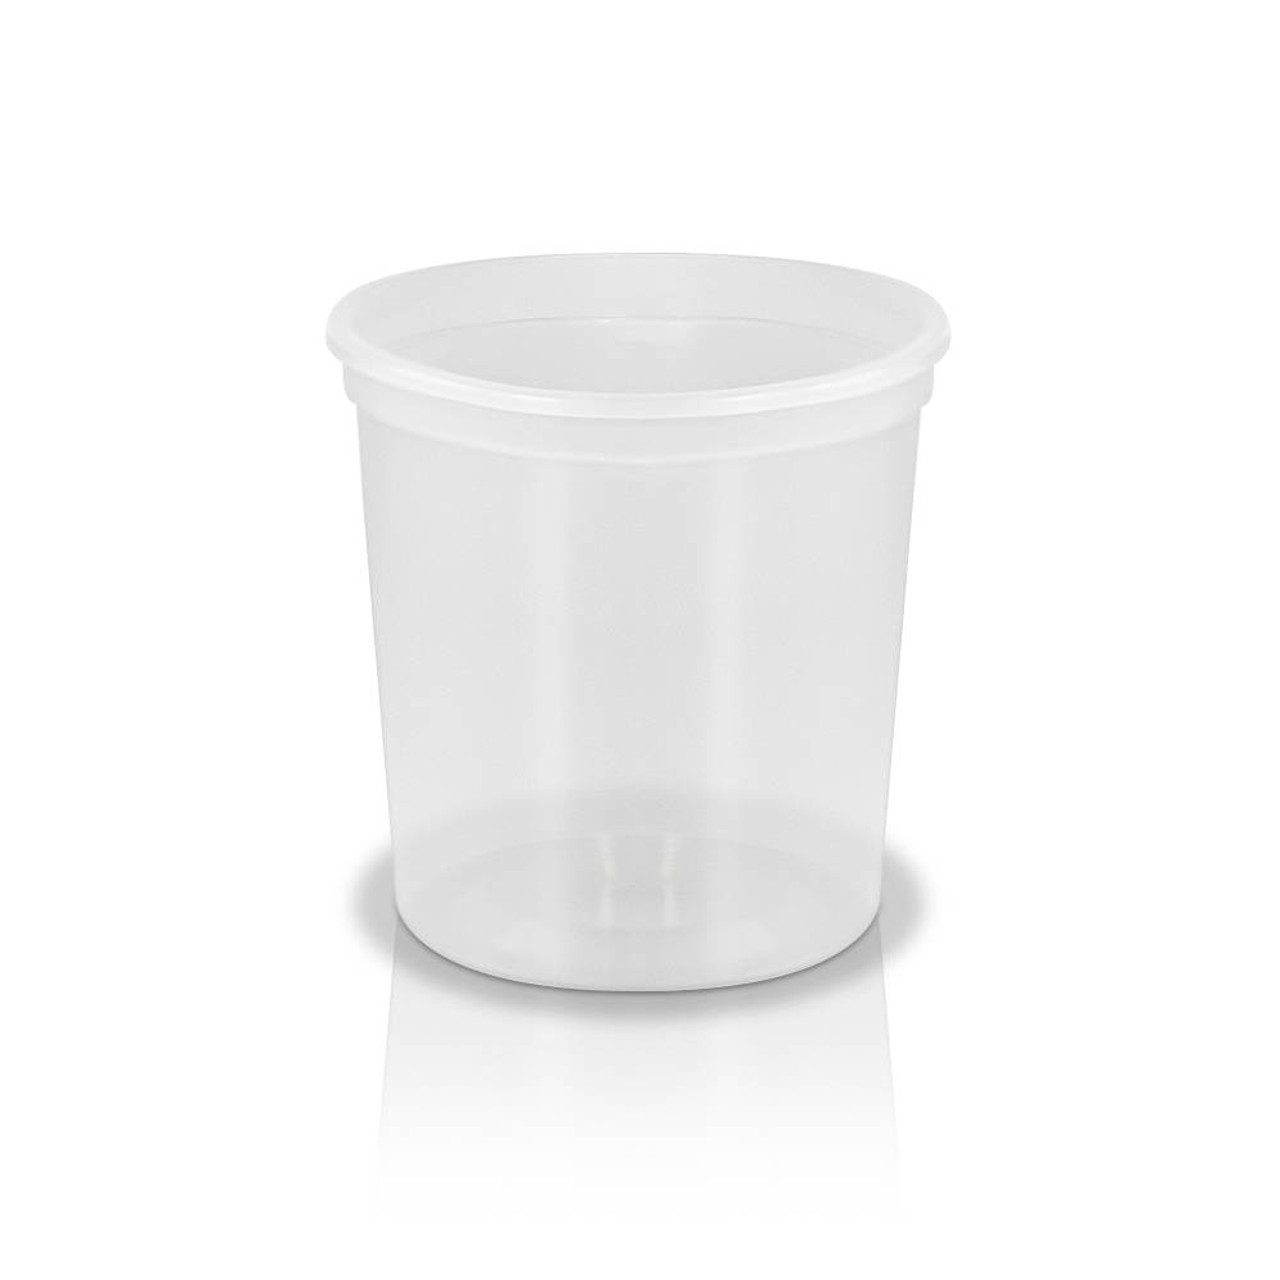  ePackageSupply 16 oz. (Pint) Containers with Lids